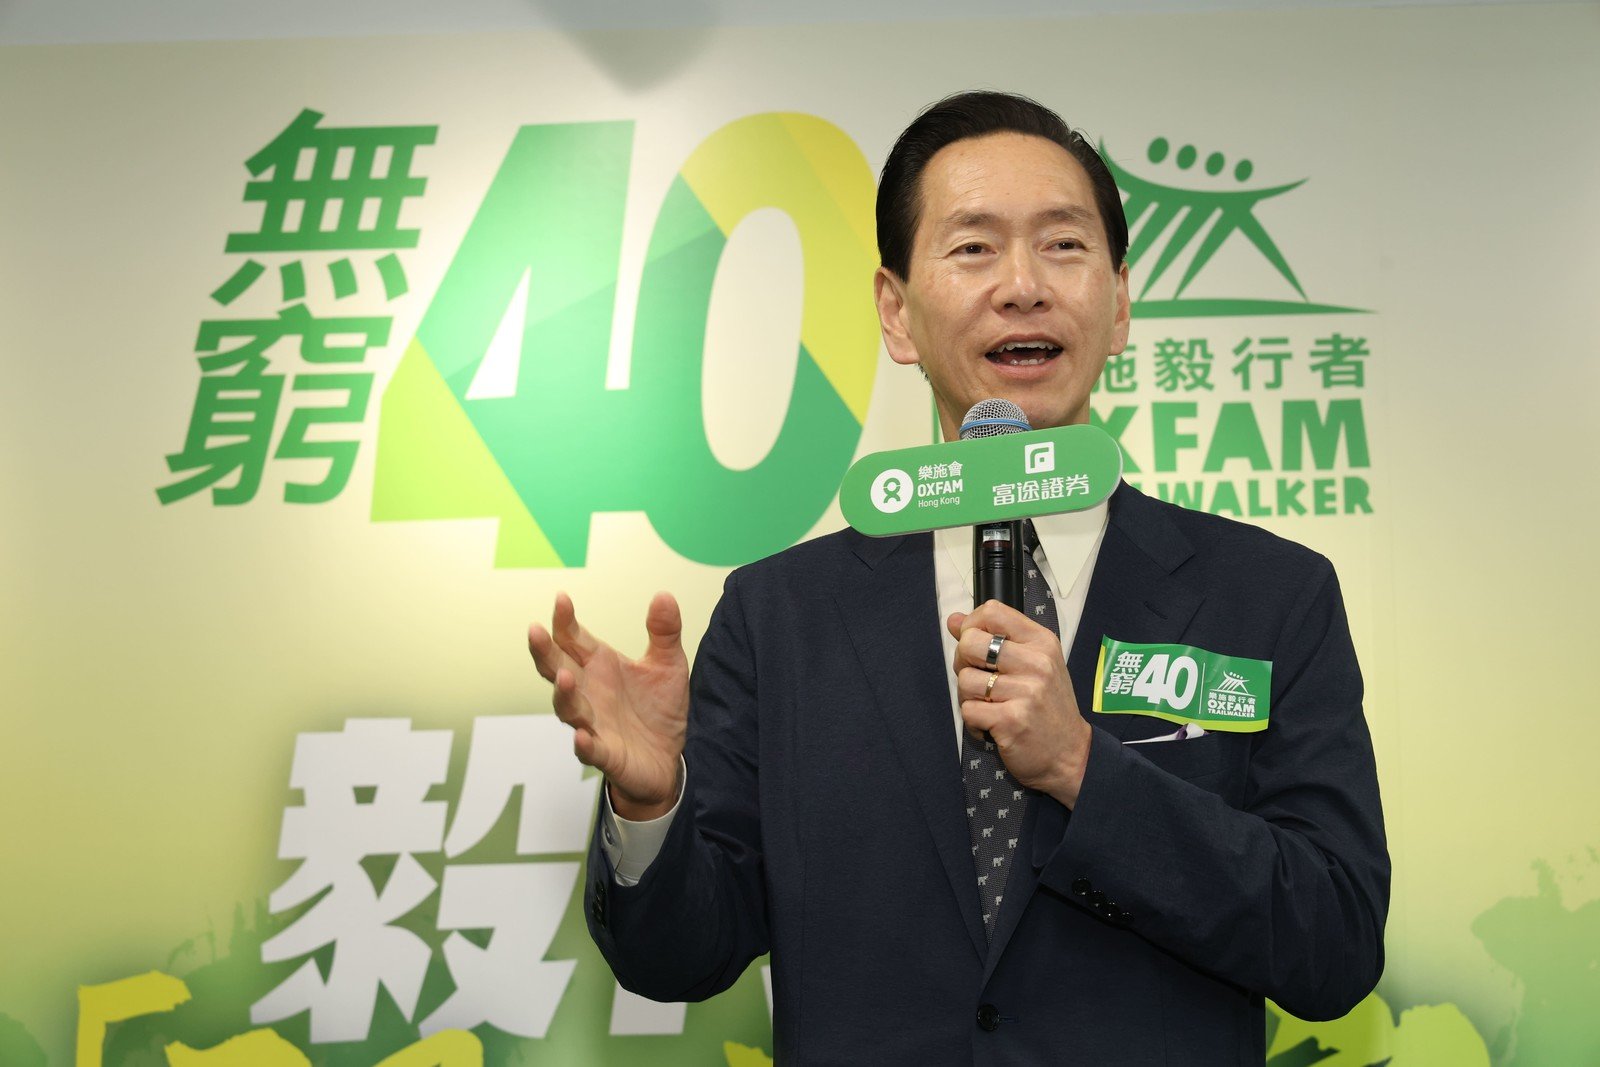 During the press conference for "Oxfam Trailwalker 2024", Bernard Chan, Oxfam Trailwalker Steering Group Convenor, expressed his pride in the event being recognized as a mega event in Hong Kong for the latter half of the year. He also revealed the introduction of the 40-km route "40th Anniversary Edition" route.